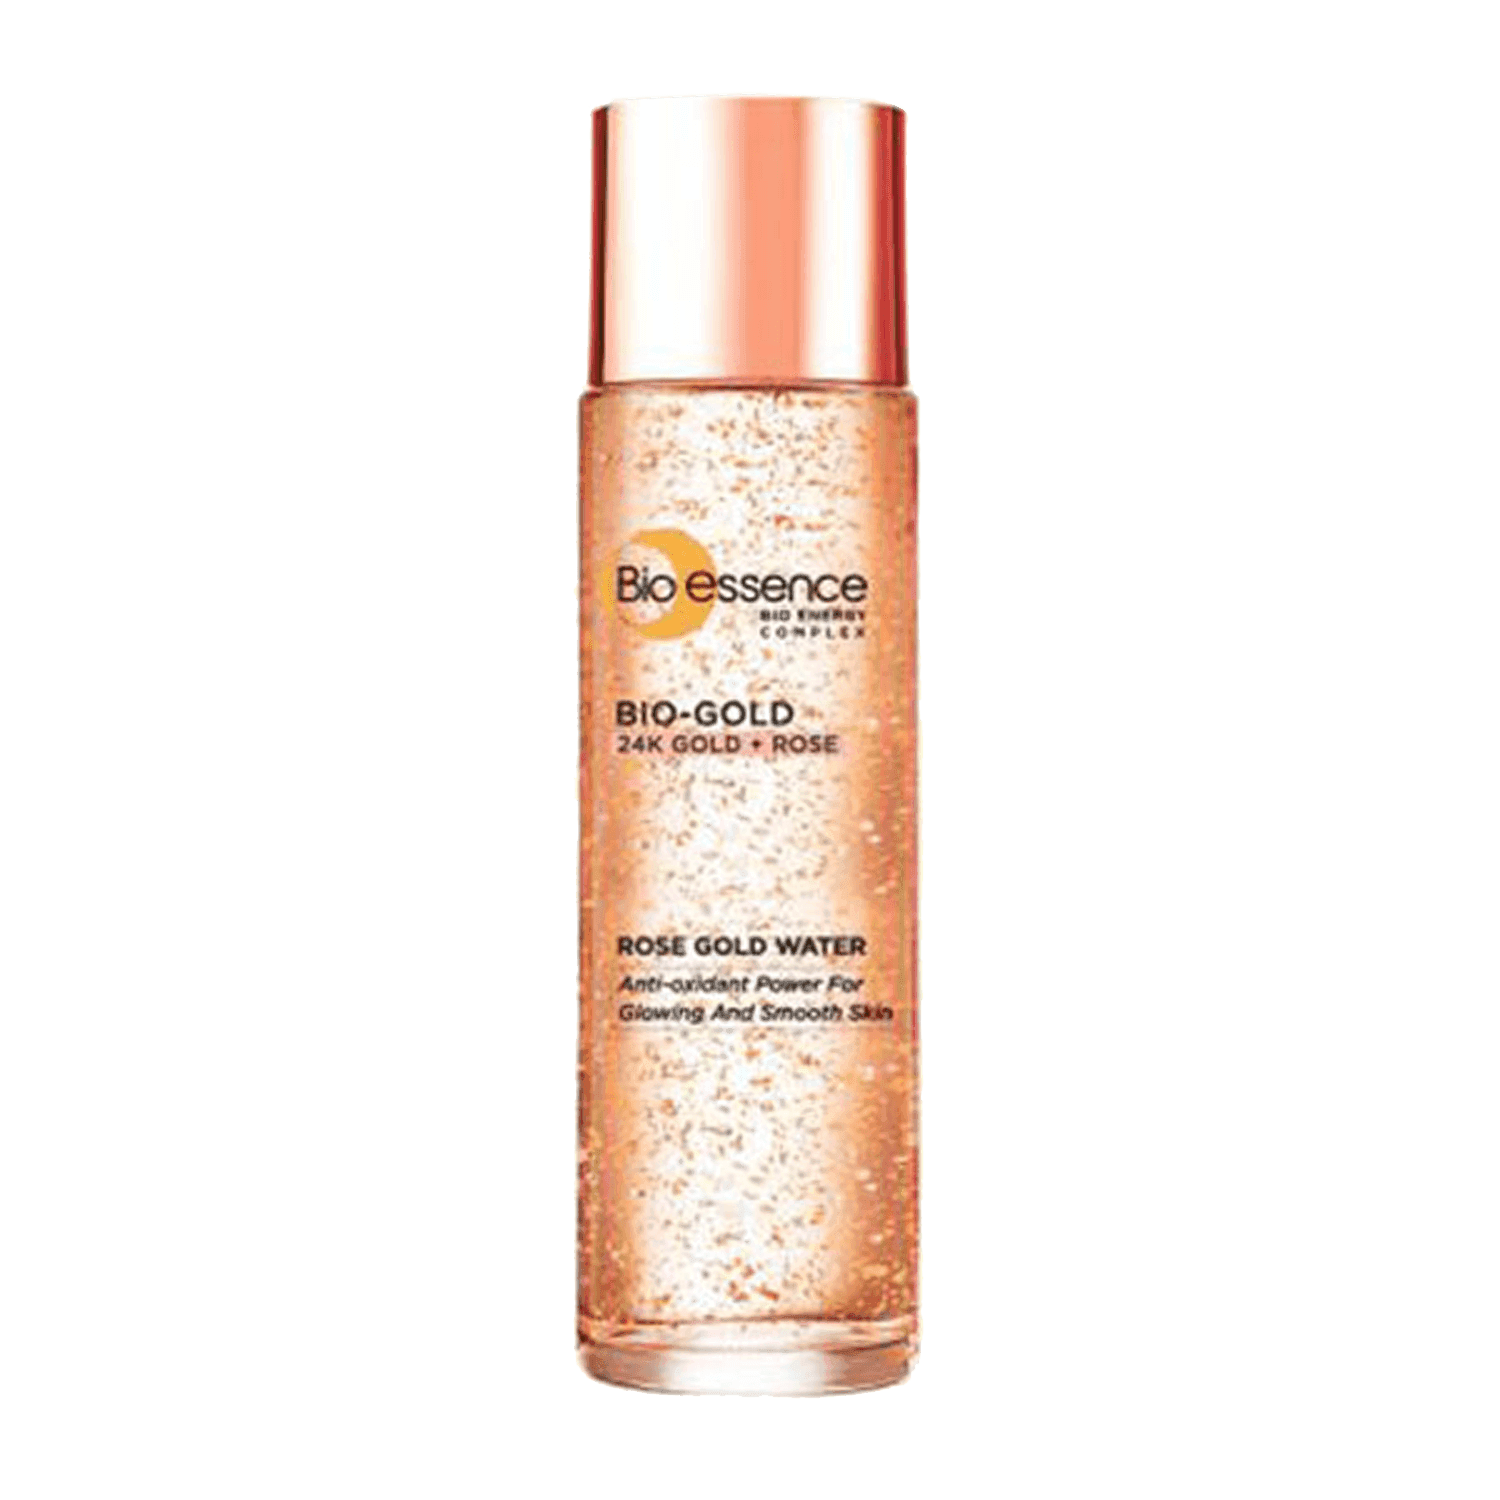 bio essence bio-gold rose gold water essence with visible pure 24k gold (100ml)